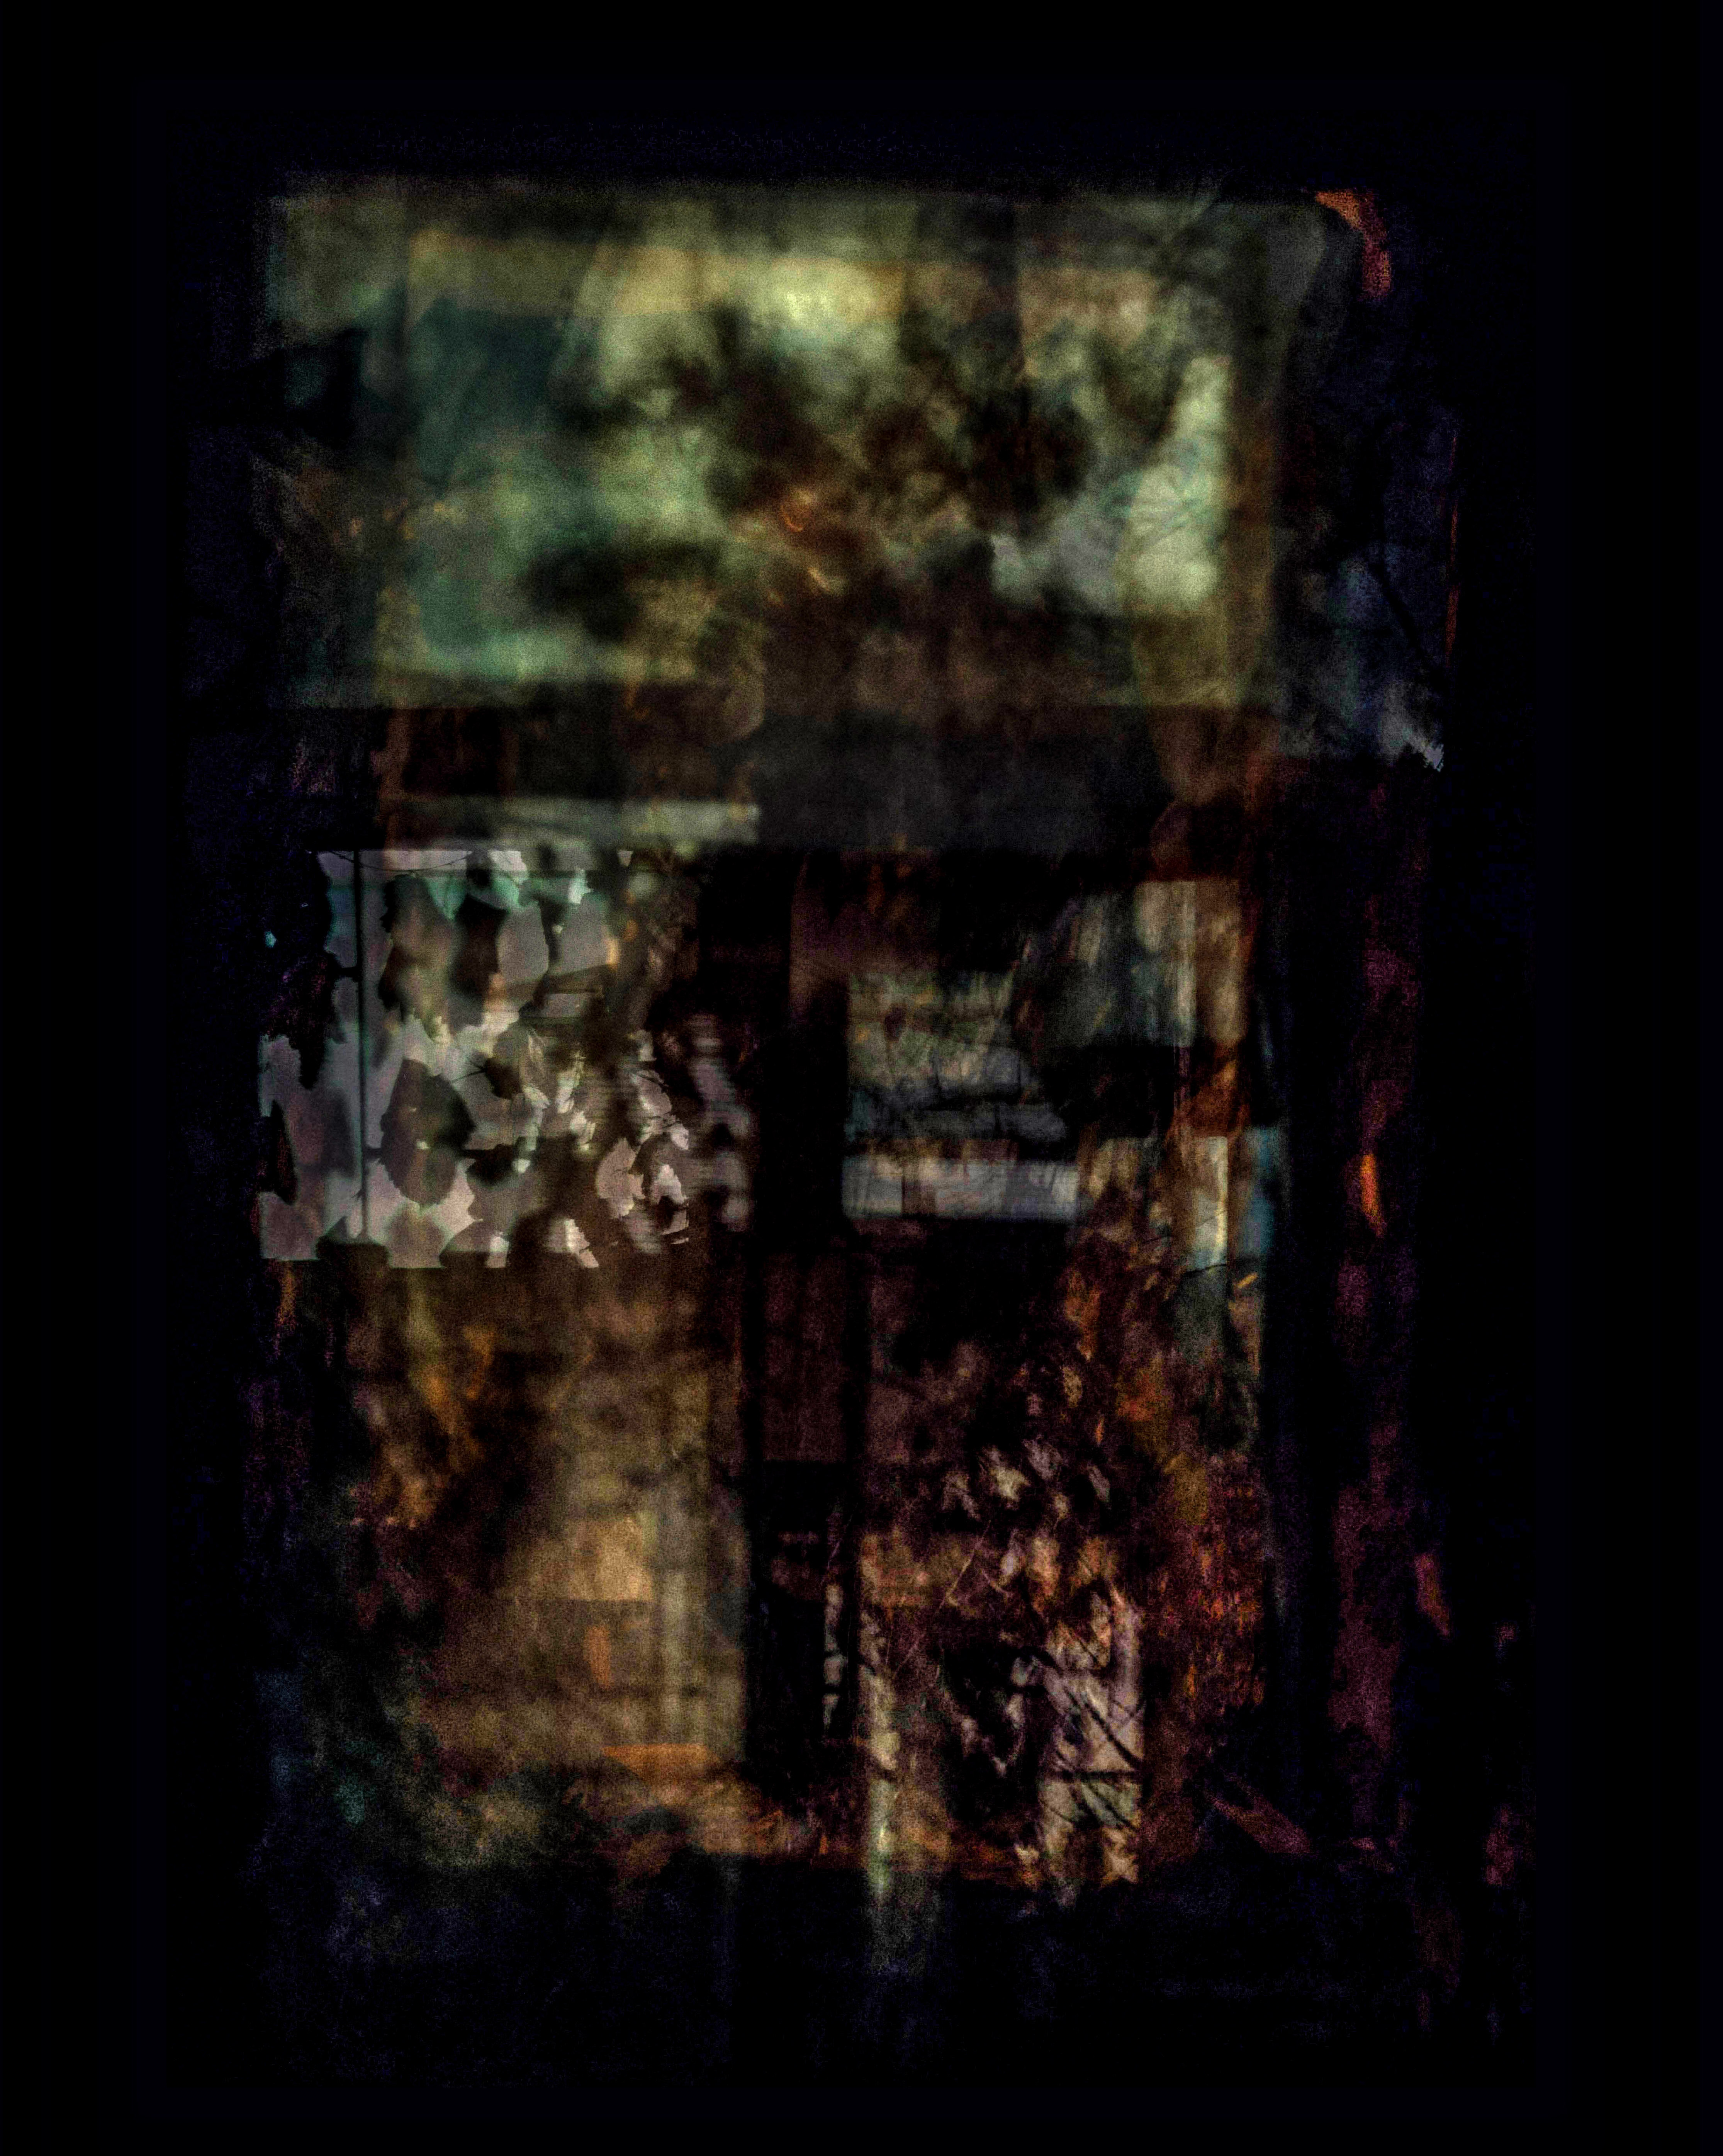 Abandoned building on Podil at night. Digital collage by Hvrenja